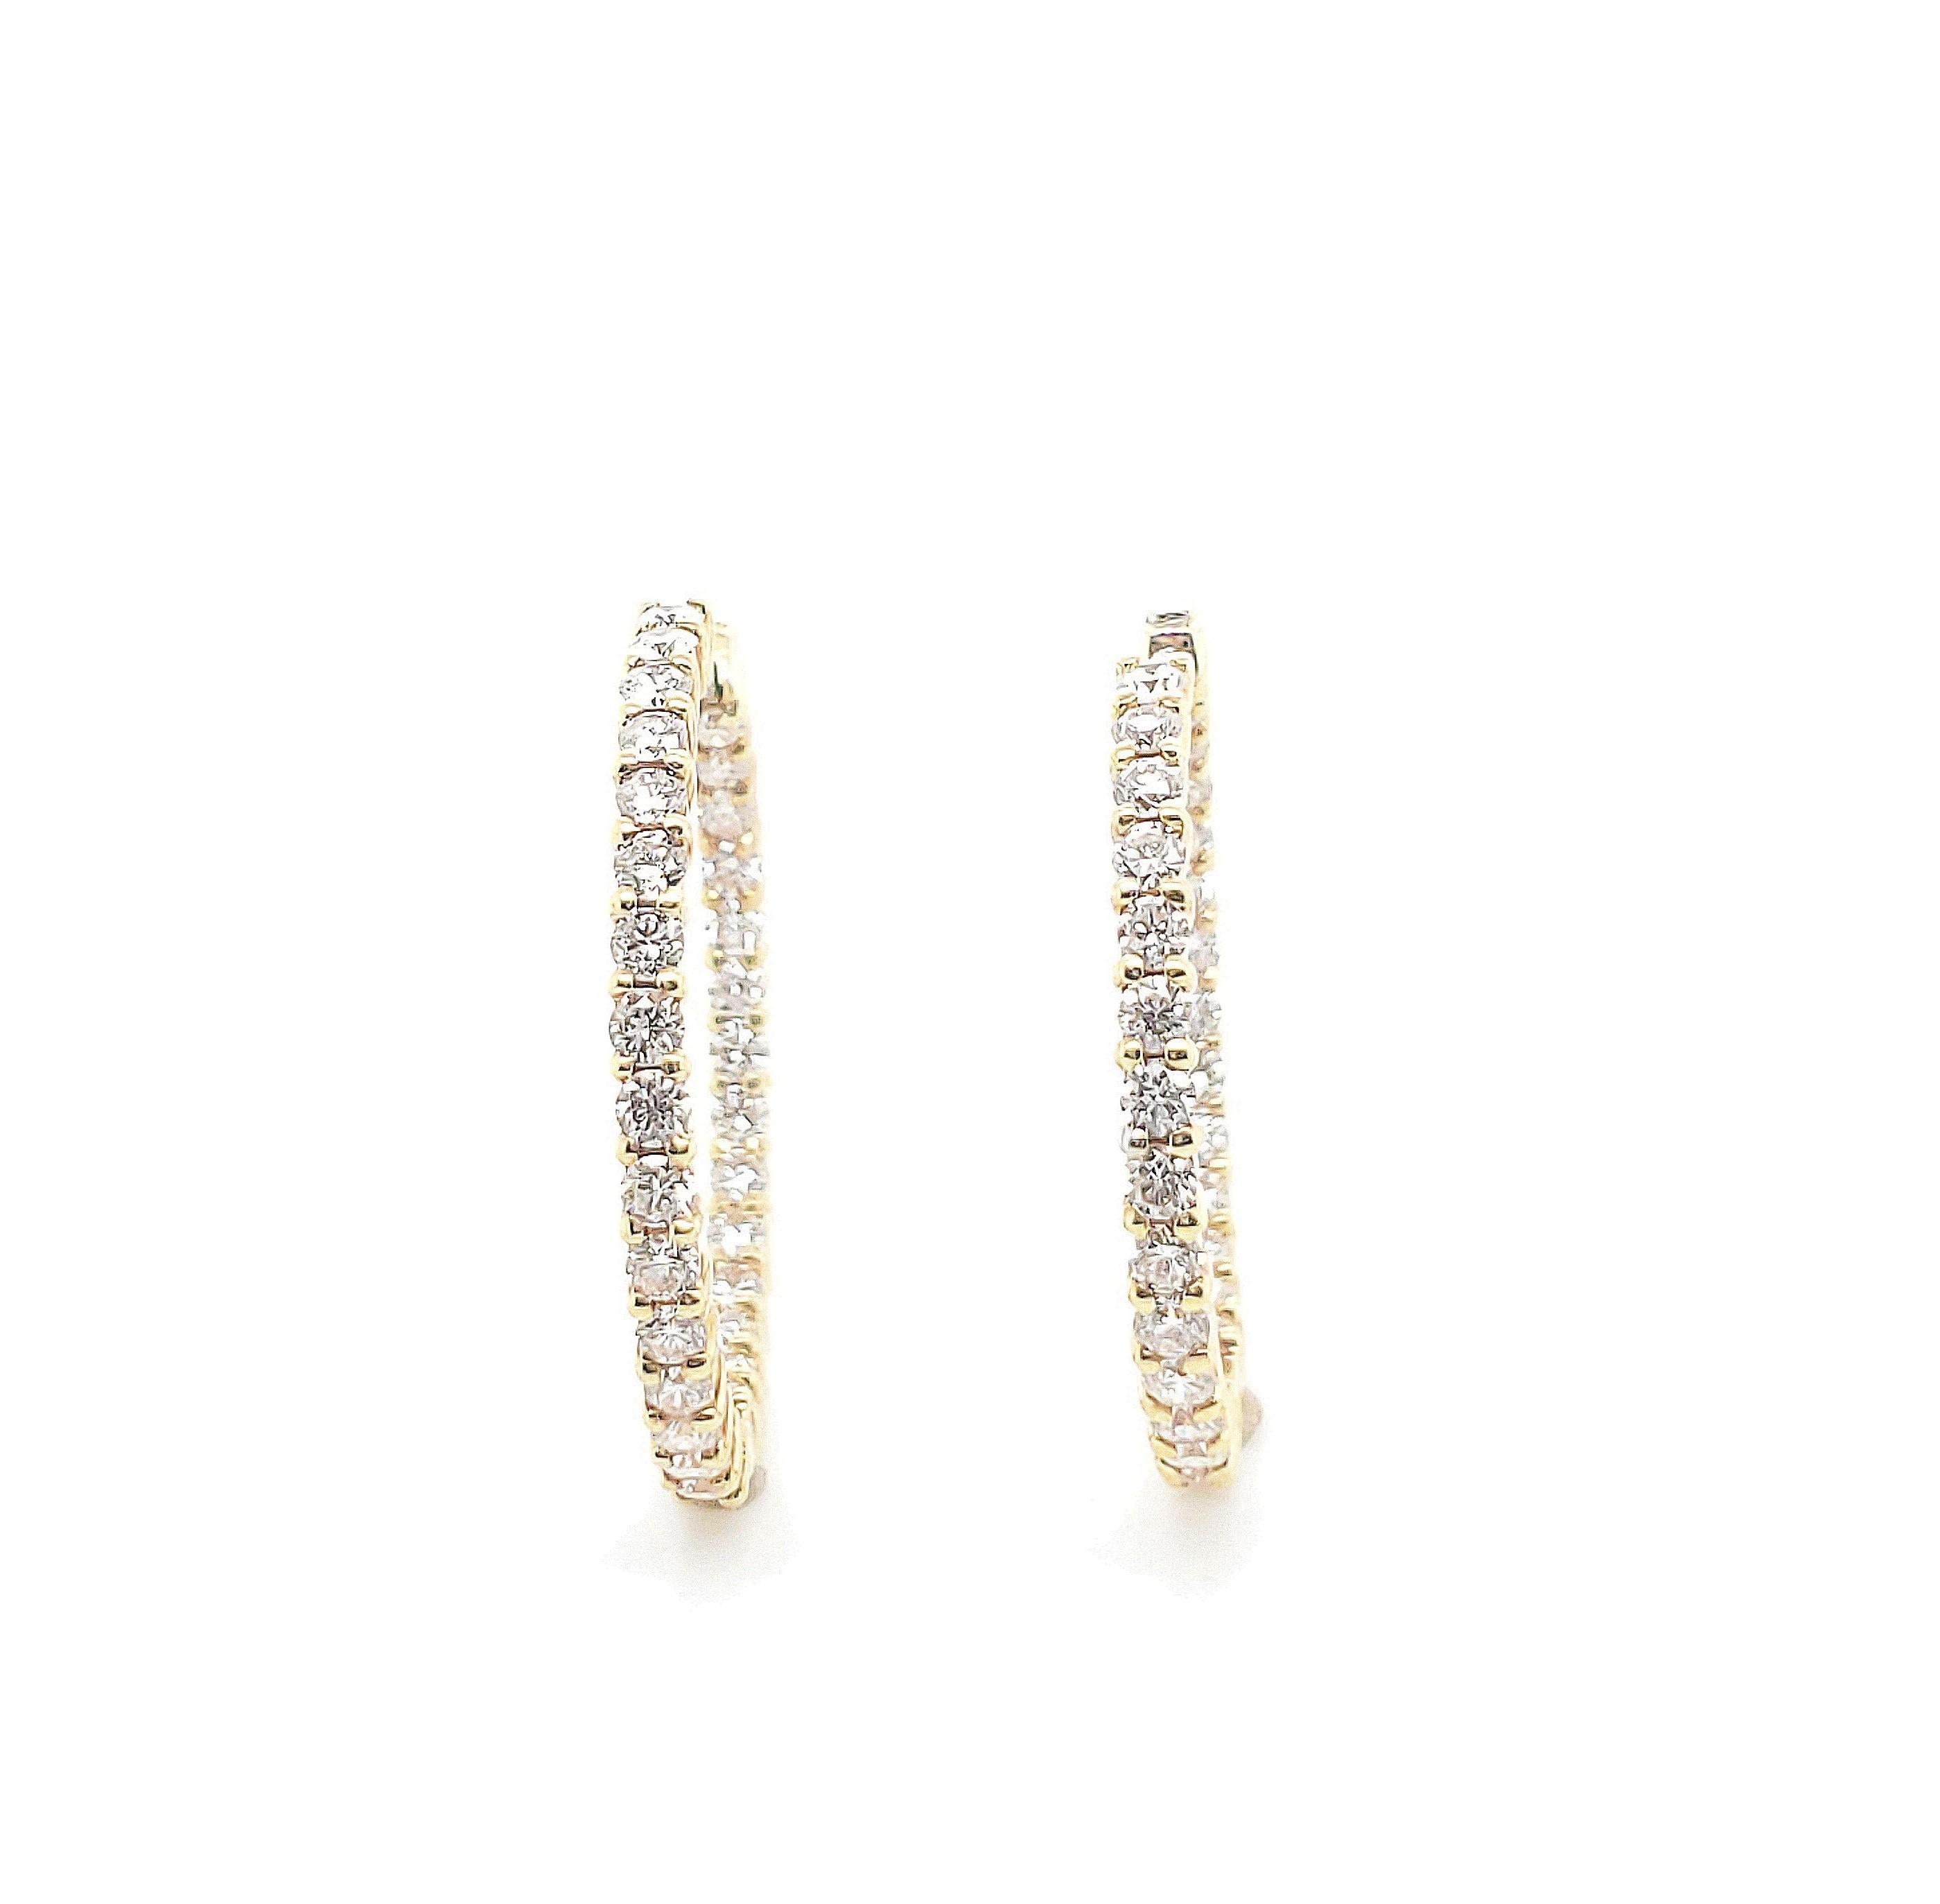 Authentic Roberto Coin 18 karat yellow gold hoop earrings set with approx. 2.5 carats of round brilliant cut diamonds (F color, VS clarity). Marked 1226VT 18K. Robert Coin signature ruby stone. Earrings measure 25mm x 32mm. Does not come with